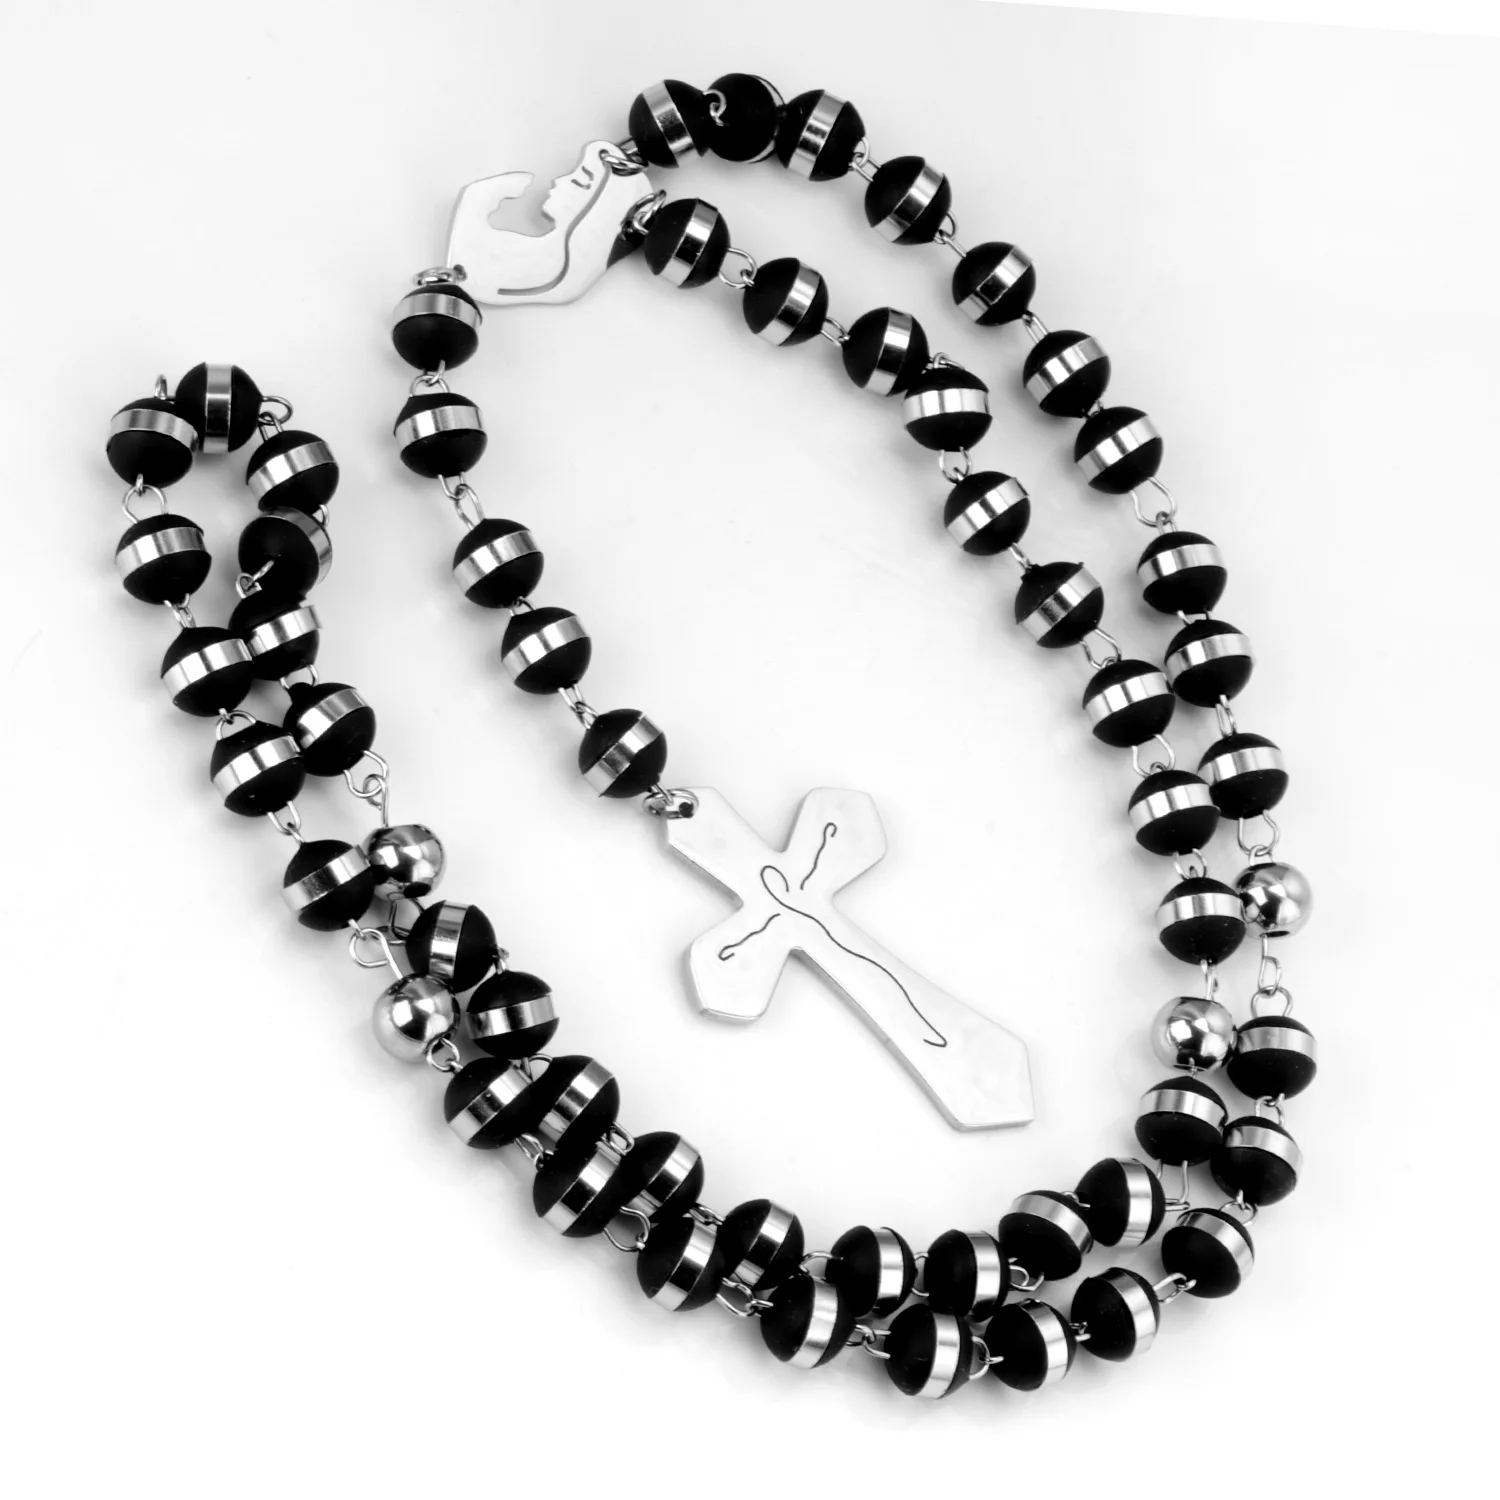 LUXUKISSKIDS Rosary Beads Christianity Necklaces Jesus Long Chains For Woman/Man Cross Pendants Steel Christian Jewelry Prayer images - 6